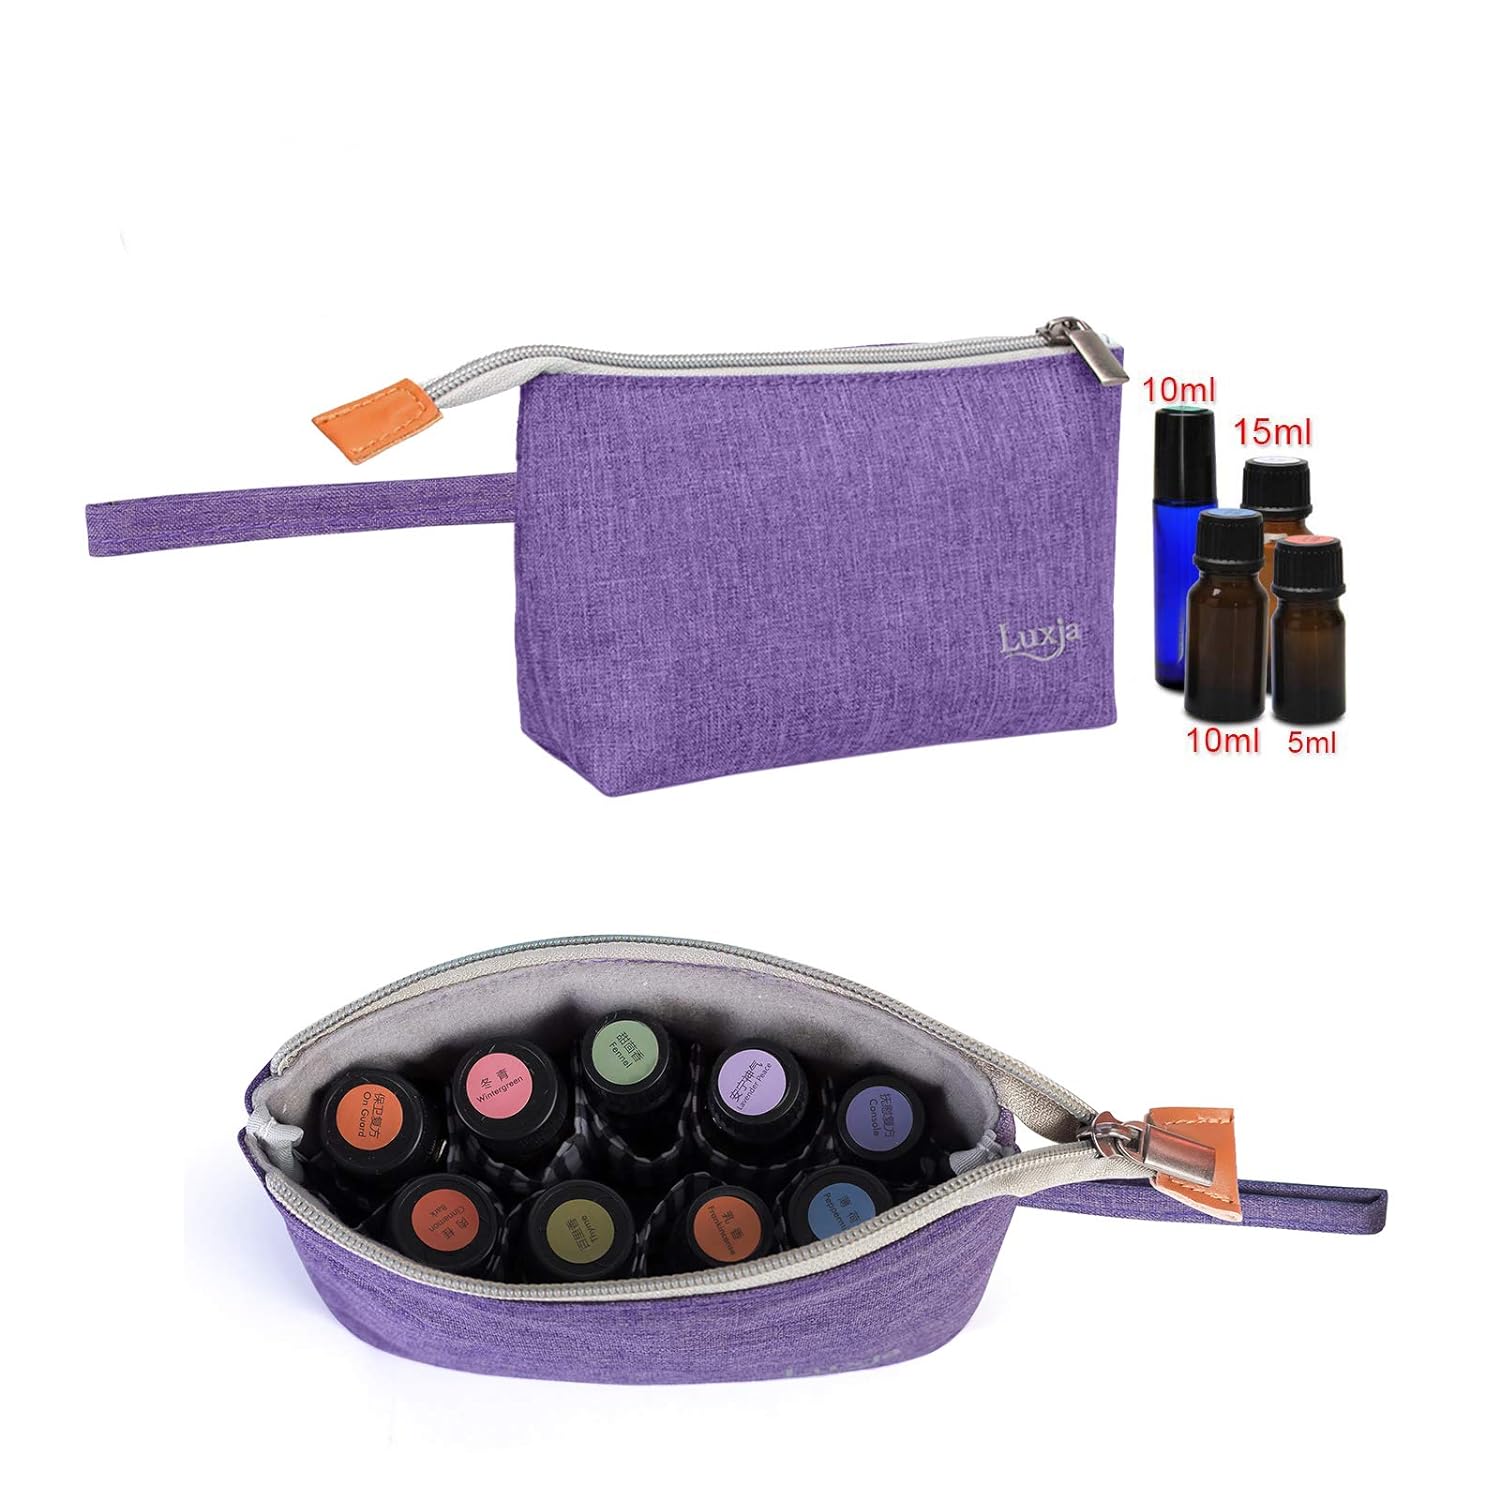 LUXJA Essential Oil Carrying Bag - Holds 8 Bottles (5ml-15ml, Also Fits for Roller Bottles), Portable Organizer for Essential Oil and Small Accessories, Purple